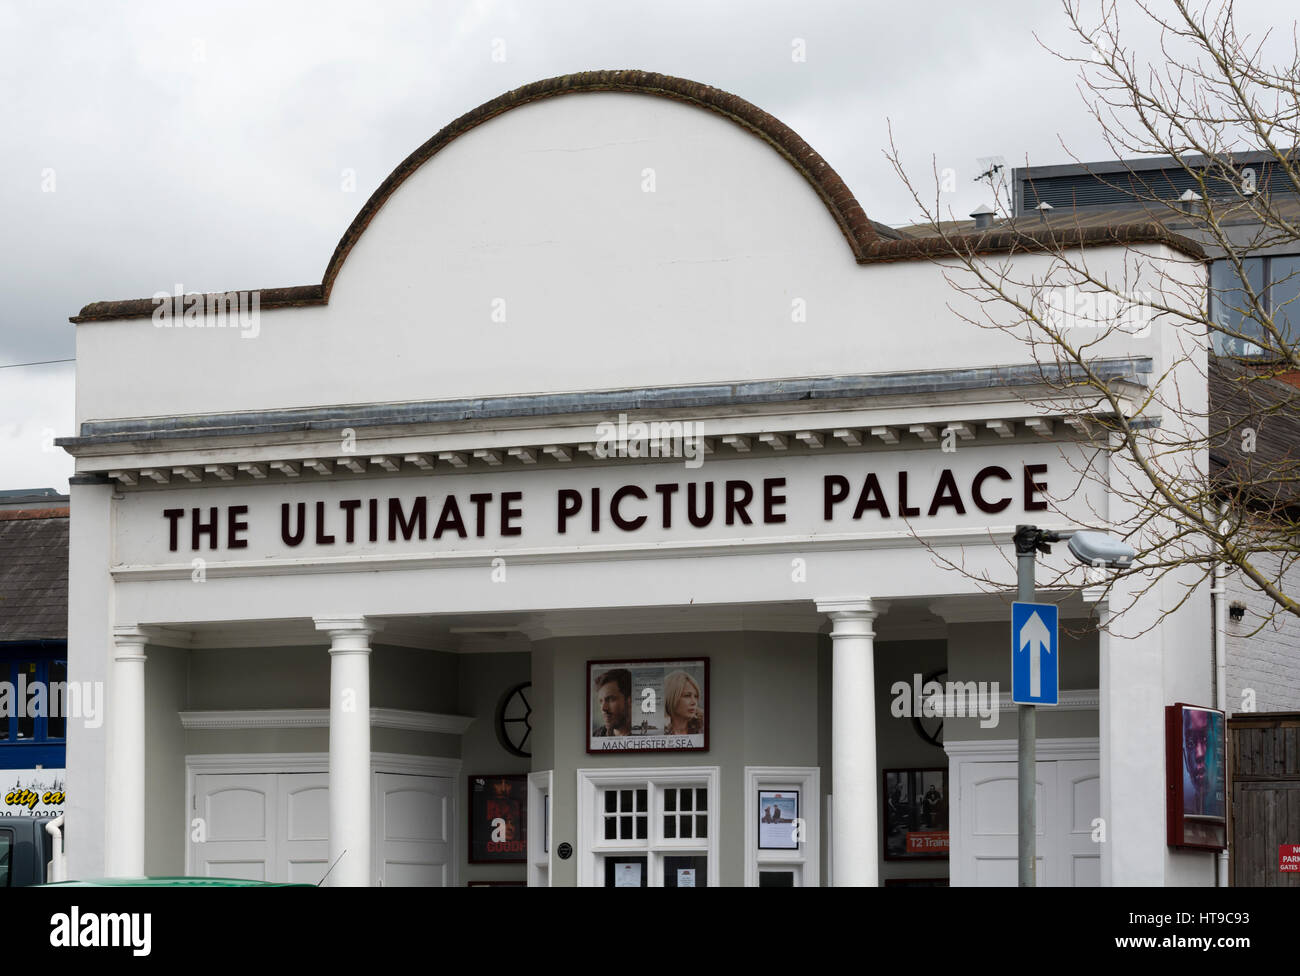 Die ultimative Picture Palace, Cowley Straße, Oxford, UK Stockfoto